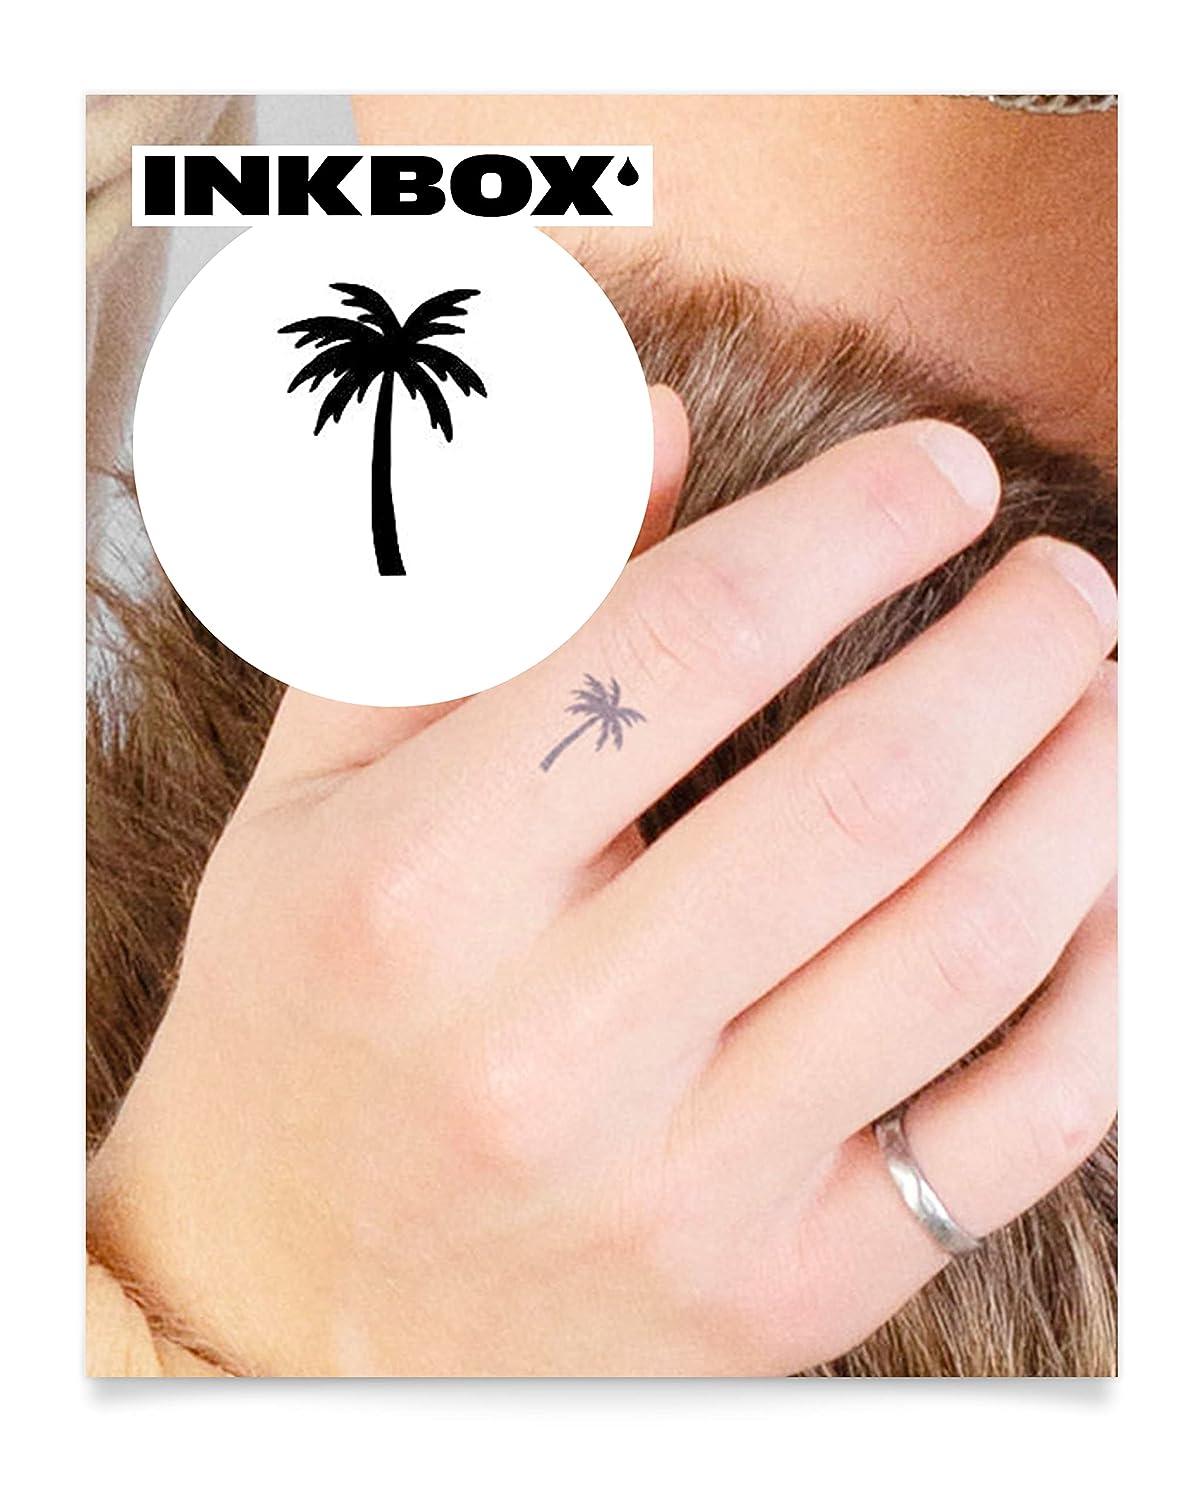 Inkbox Temporary Tattoo Review 2019 | The Strategist